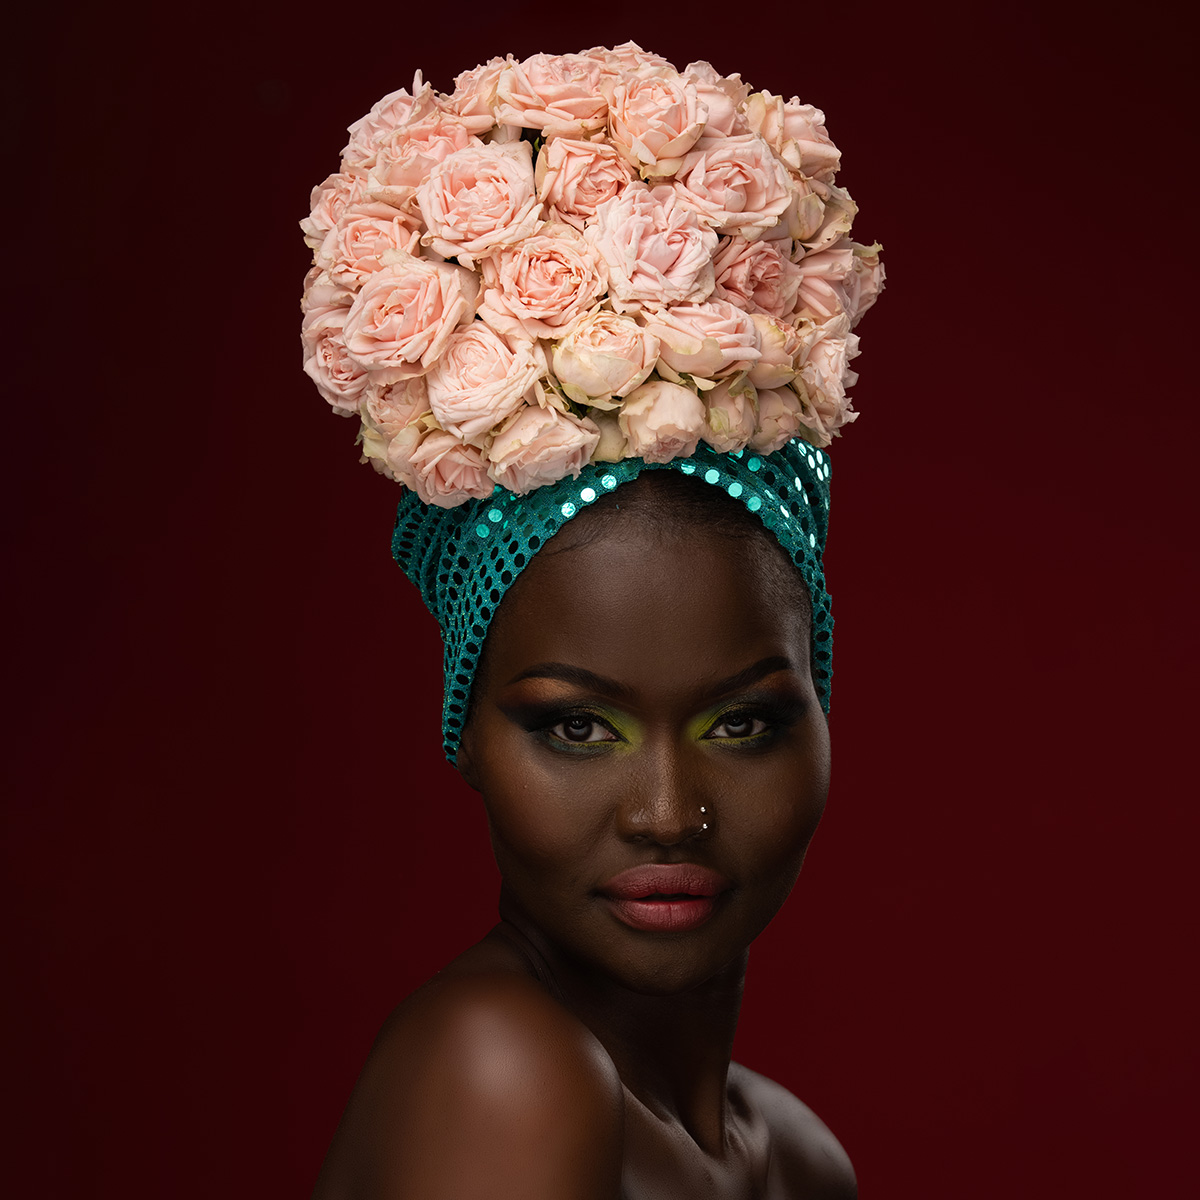 sian-flowers-introduces-two-stunning-garden-spray-roses-emerald-queen-and-lady-of-the-dawn-featured